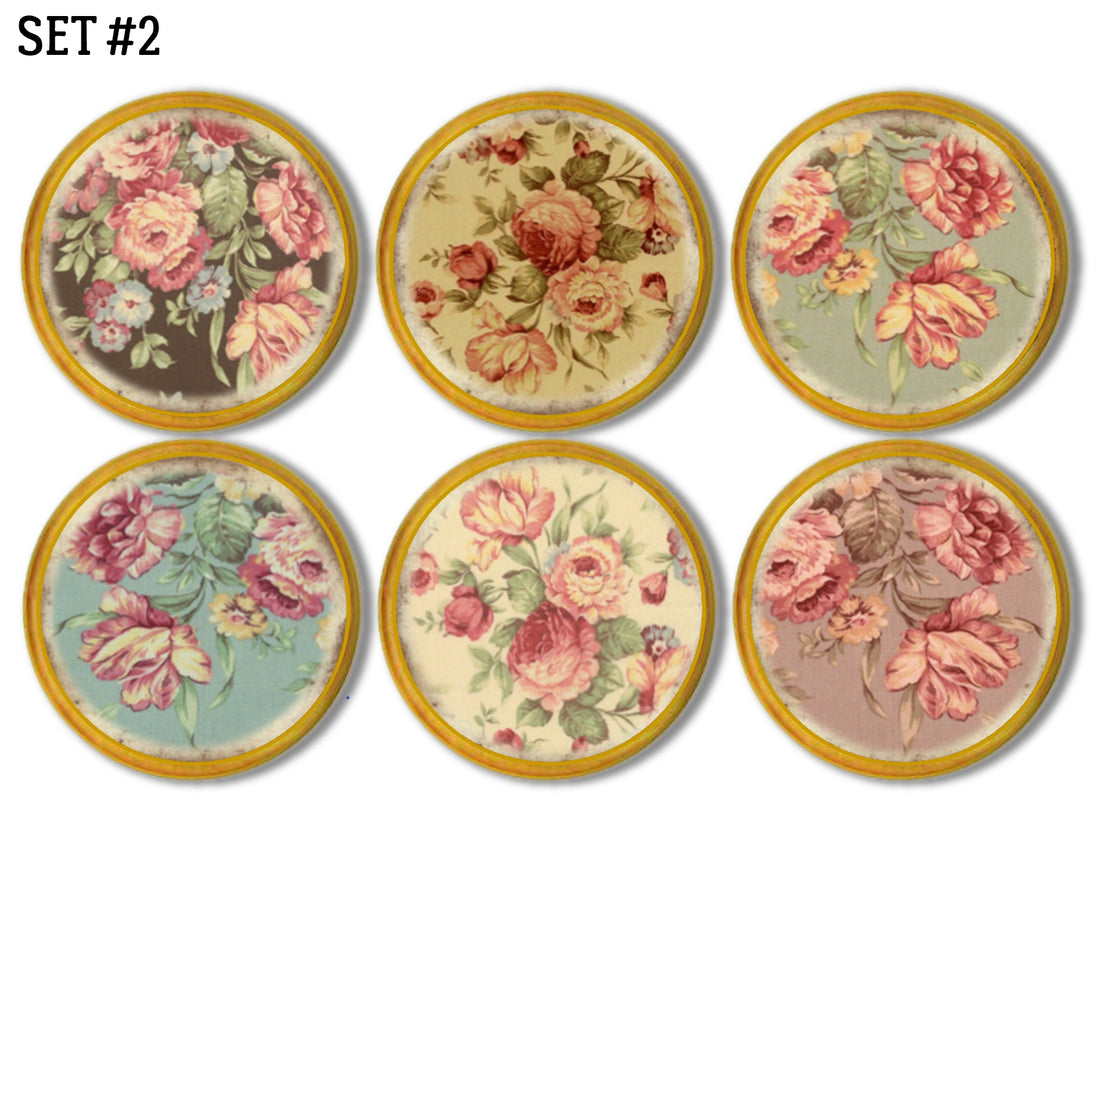 6 Handmade wooden decorative drawer pulls decorated in faded vintage floral designs. Shabby country cottage knobs.